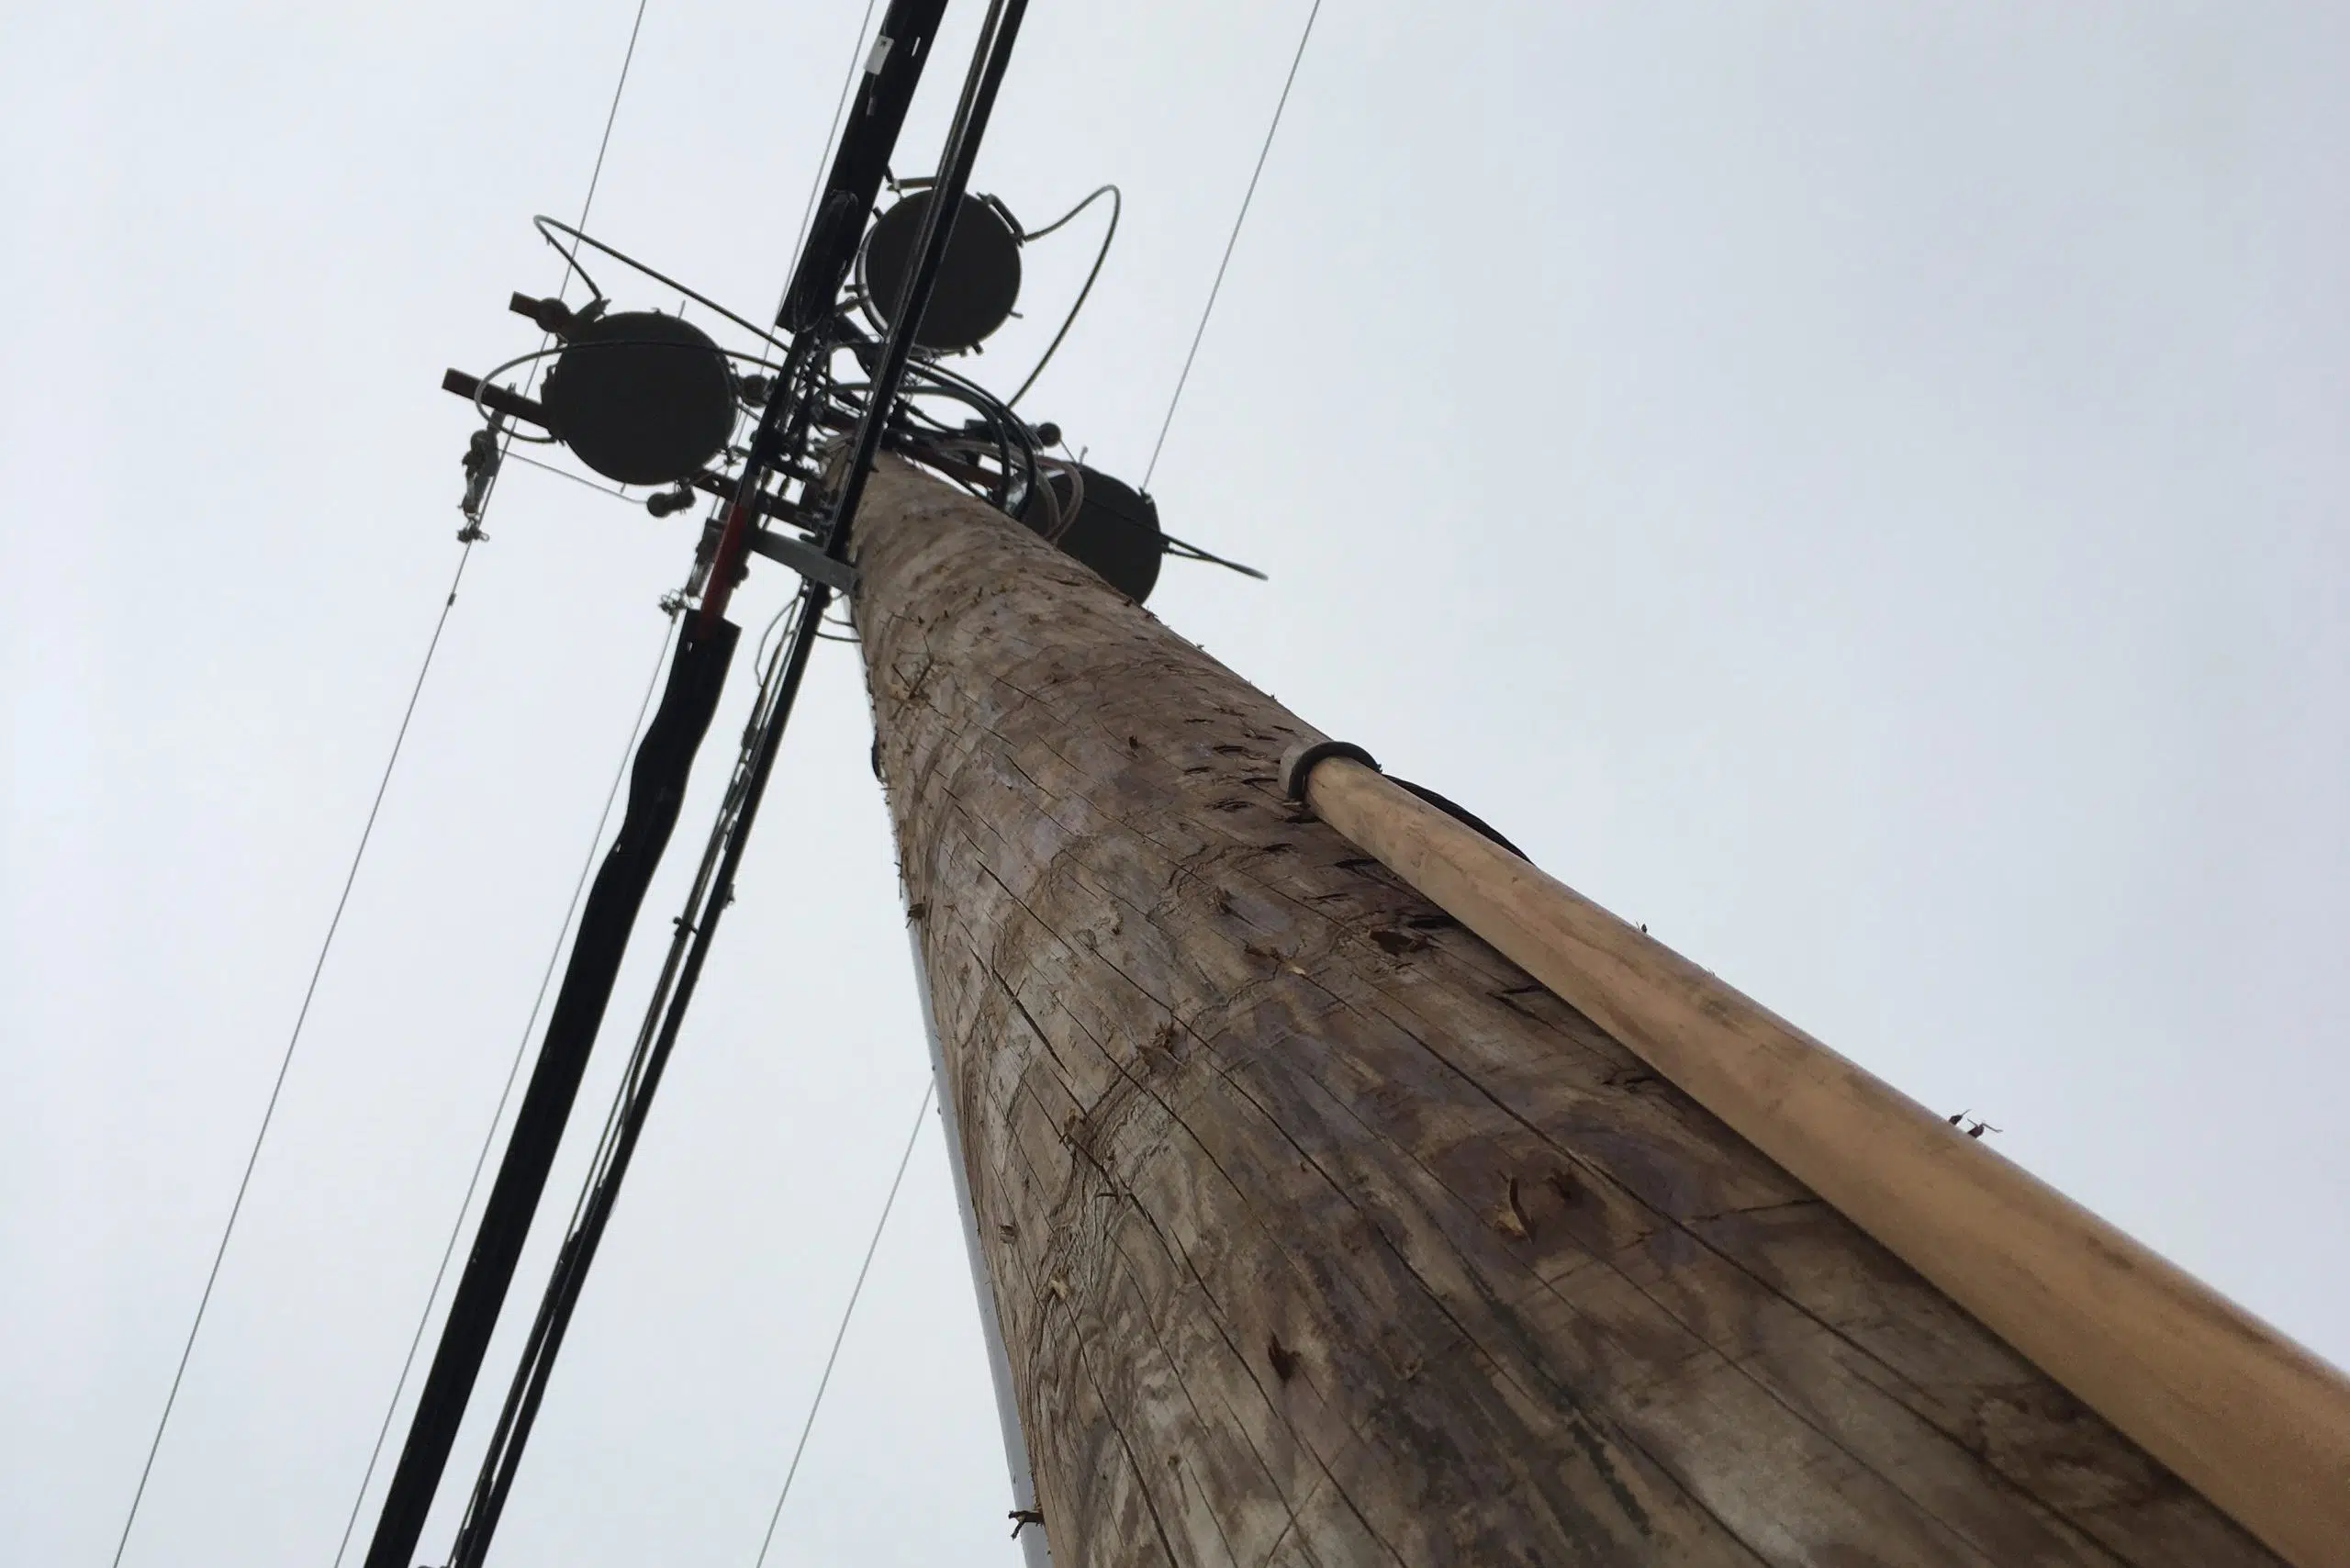 Power back for all of Maple Creek, some southwest communities still in the dark